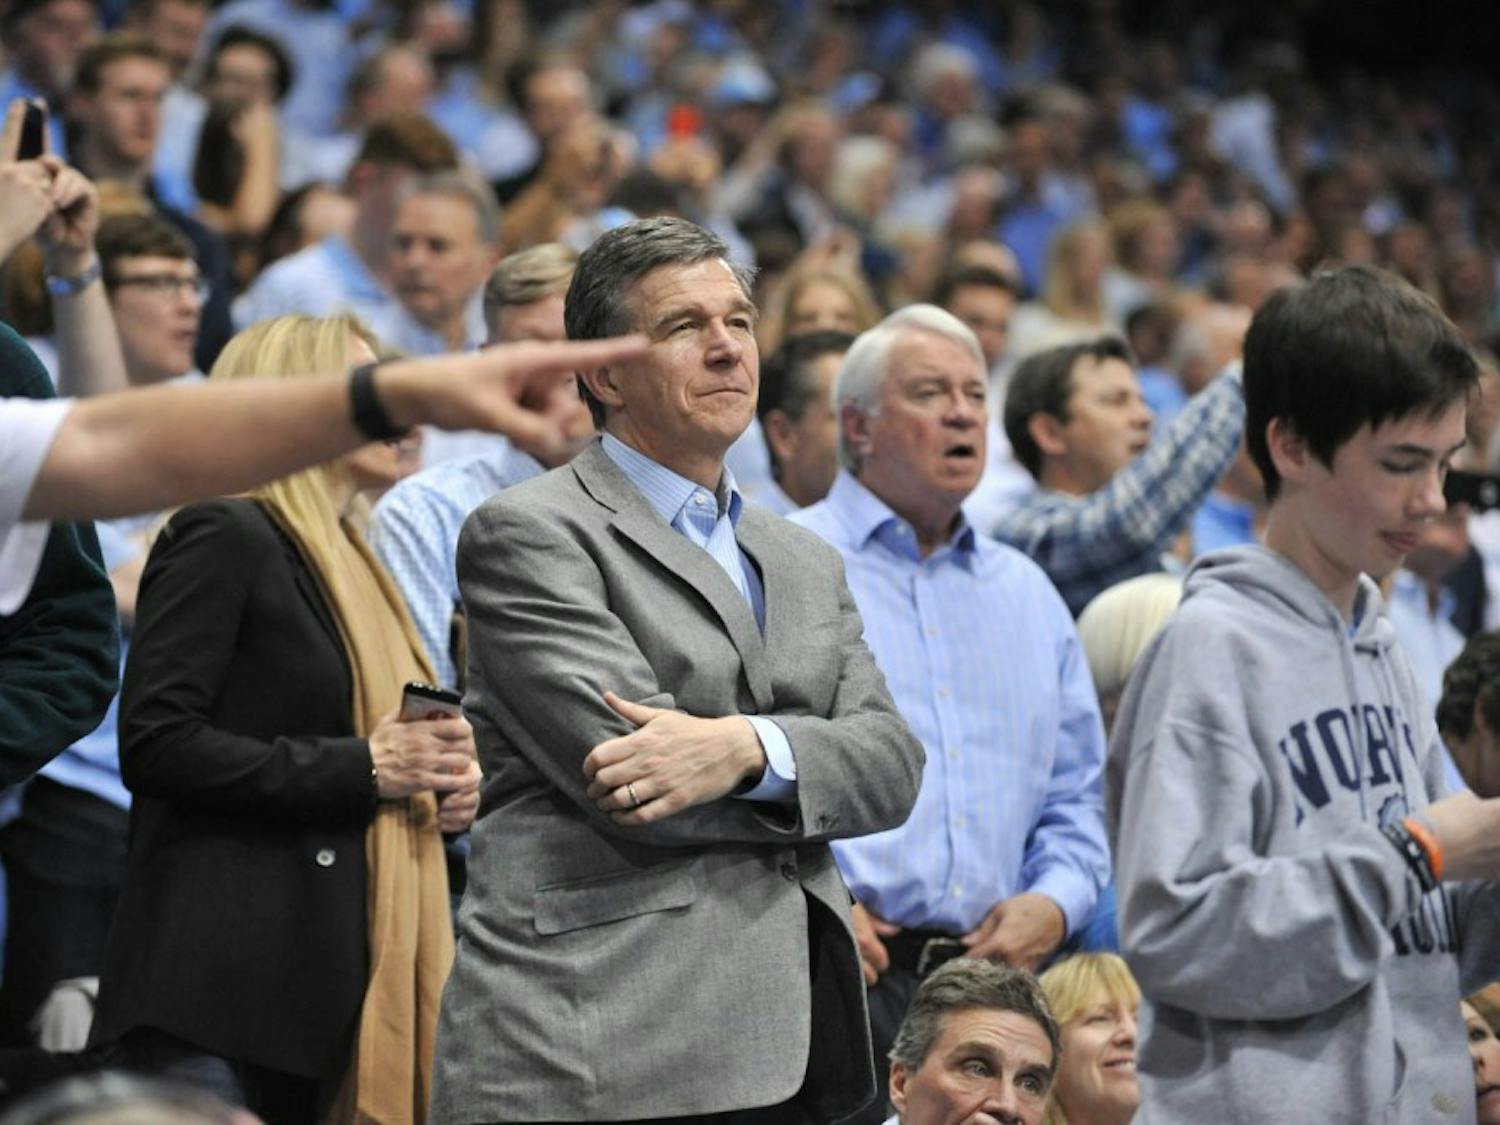 N.C. Governor Roy Cooper looks on at the UNC-Duke game.&nbsp;